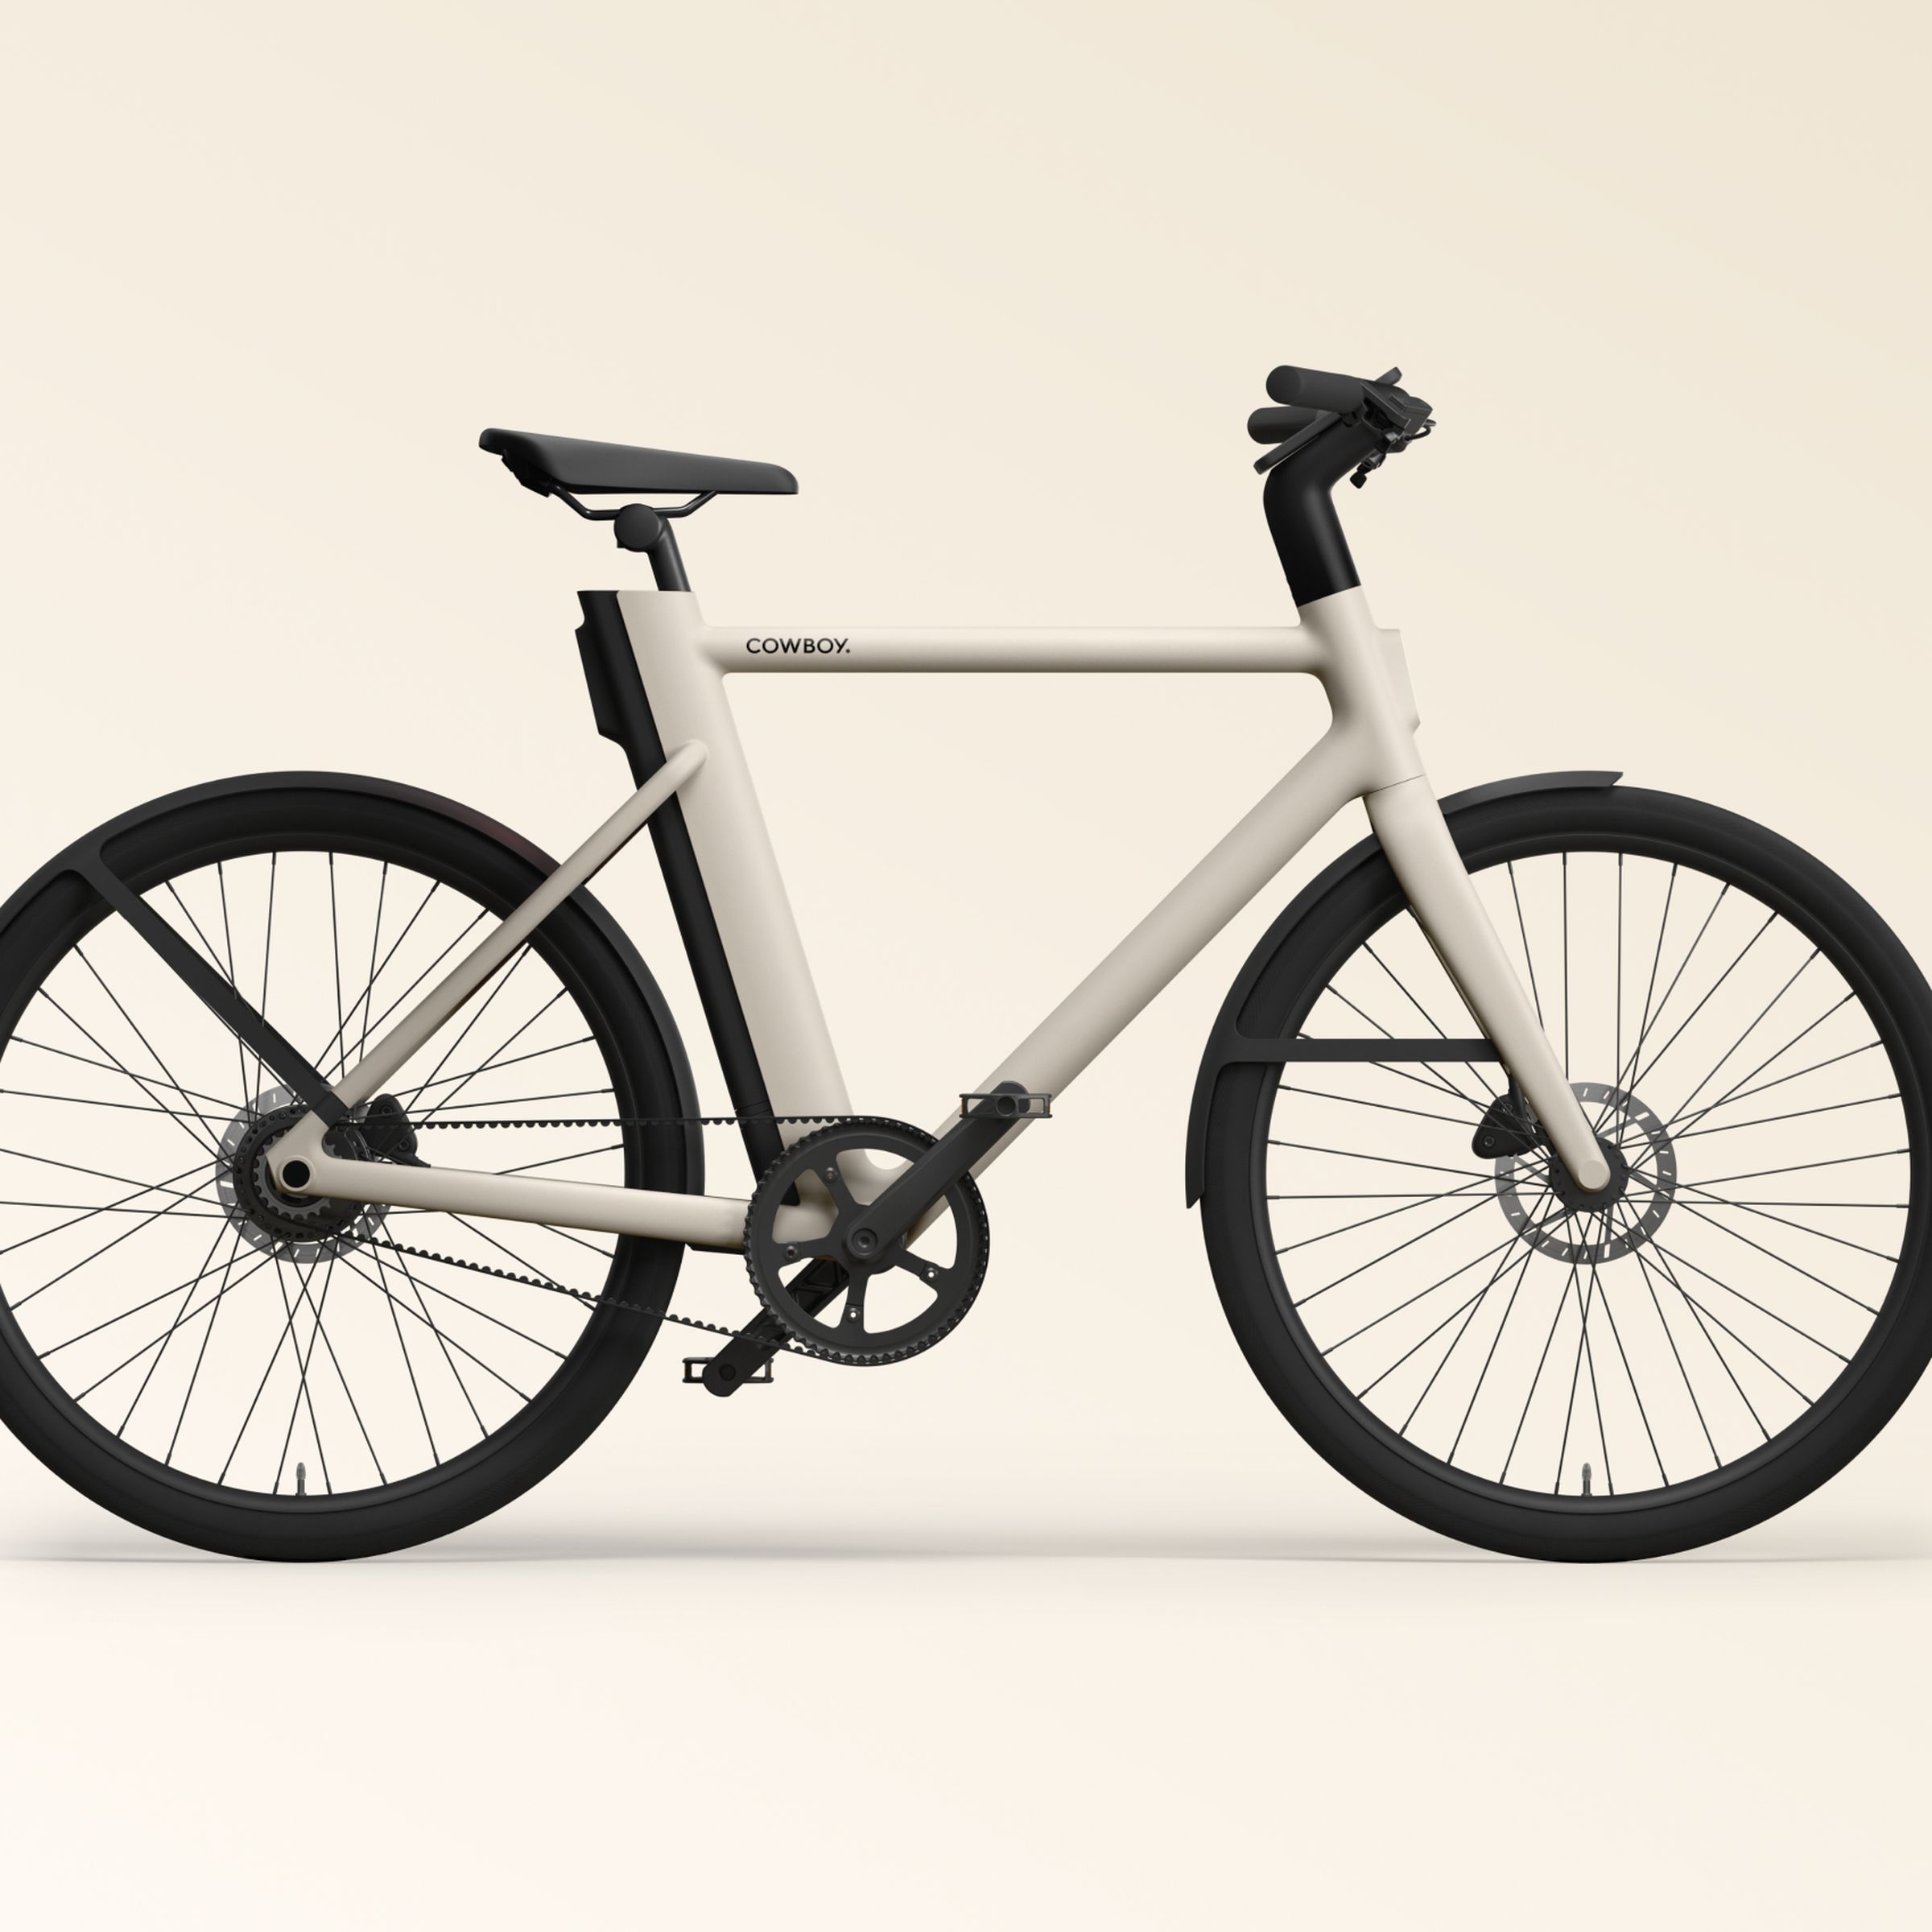 Cowboy makes some subtle changes to create an e-bike that will likely have even broader mainstream appeal.